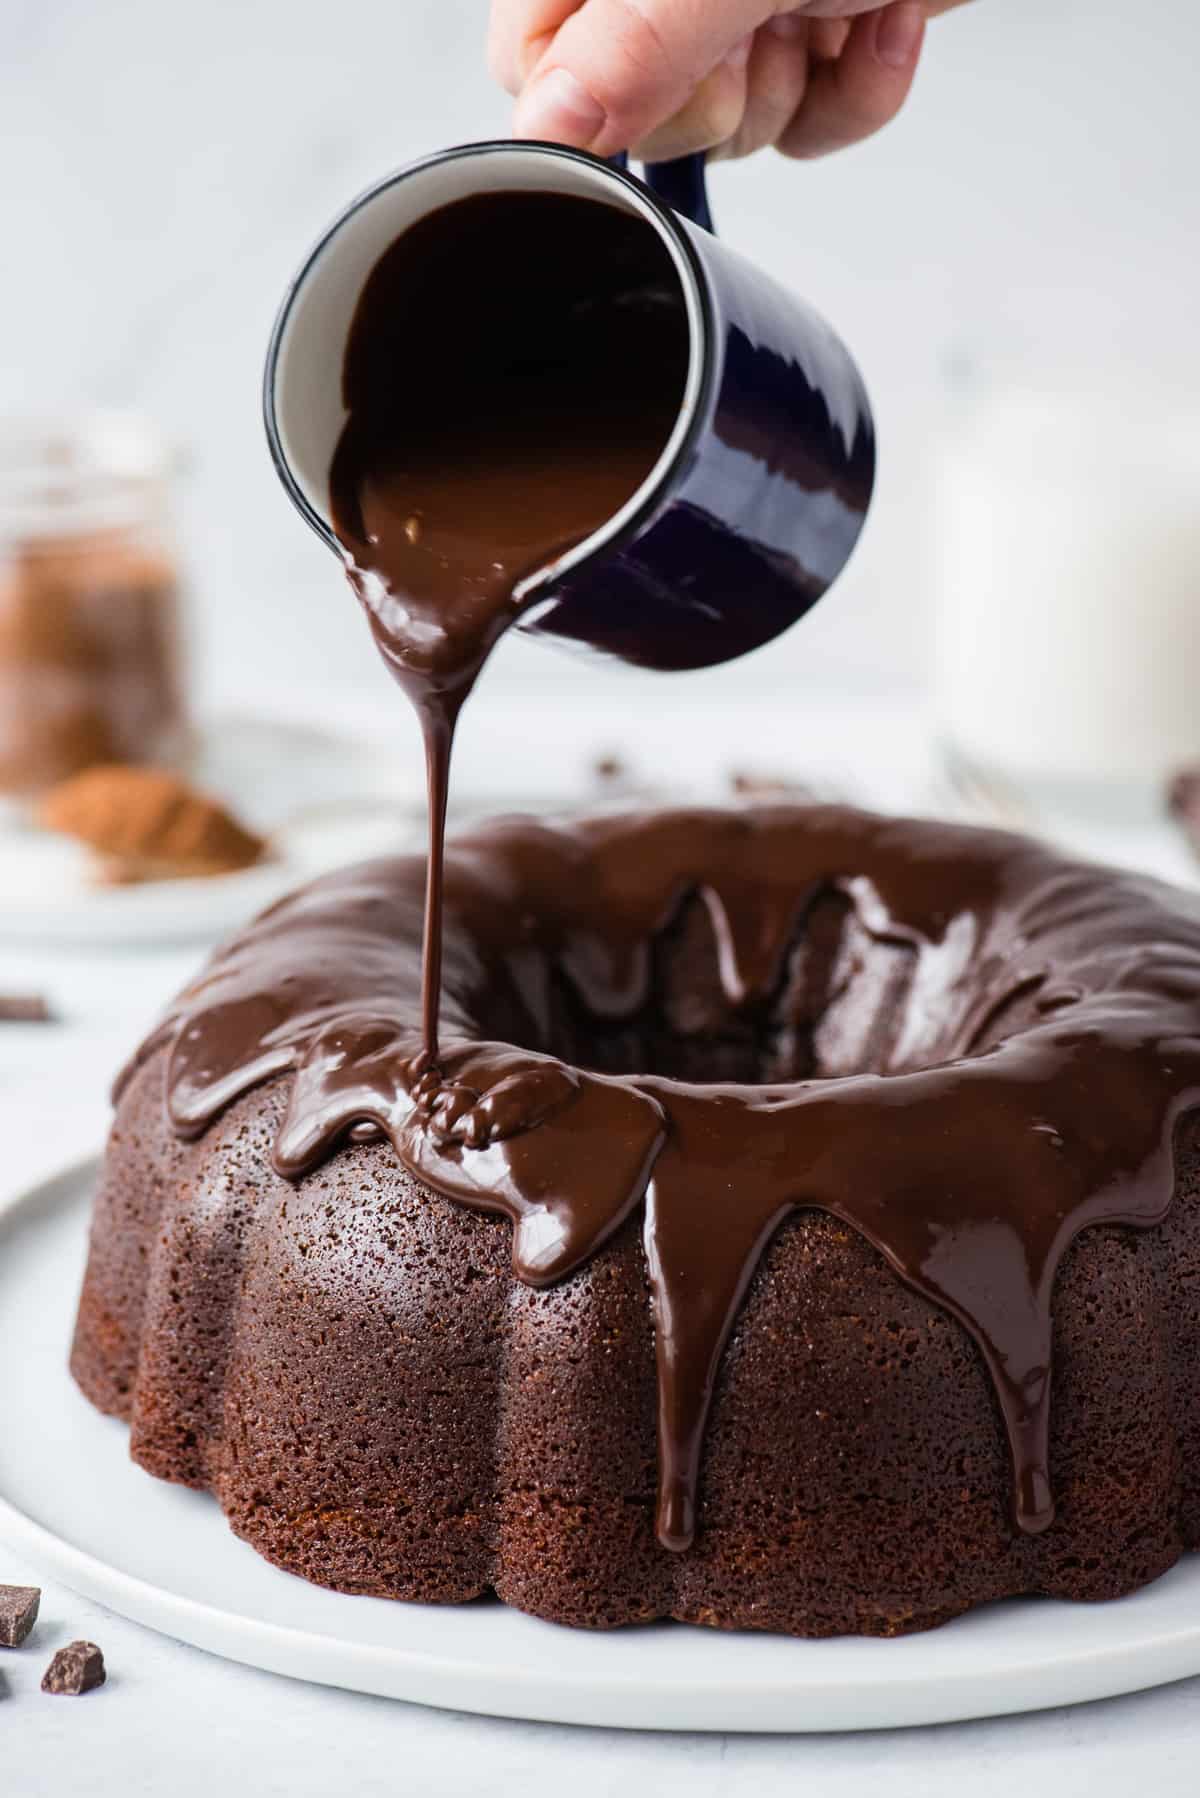 chocolate glaze being poured over chocolate bundt cake on white plate on white background